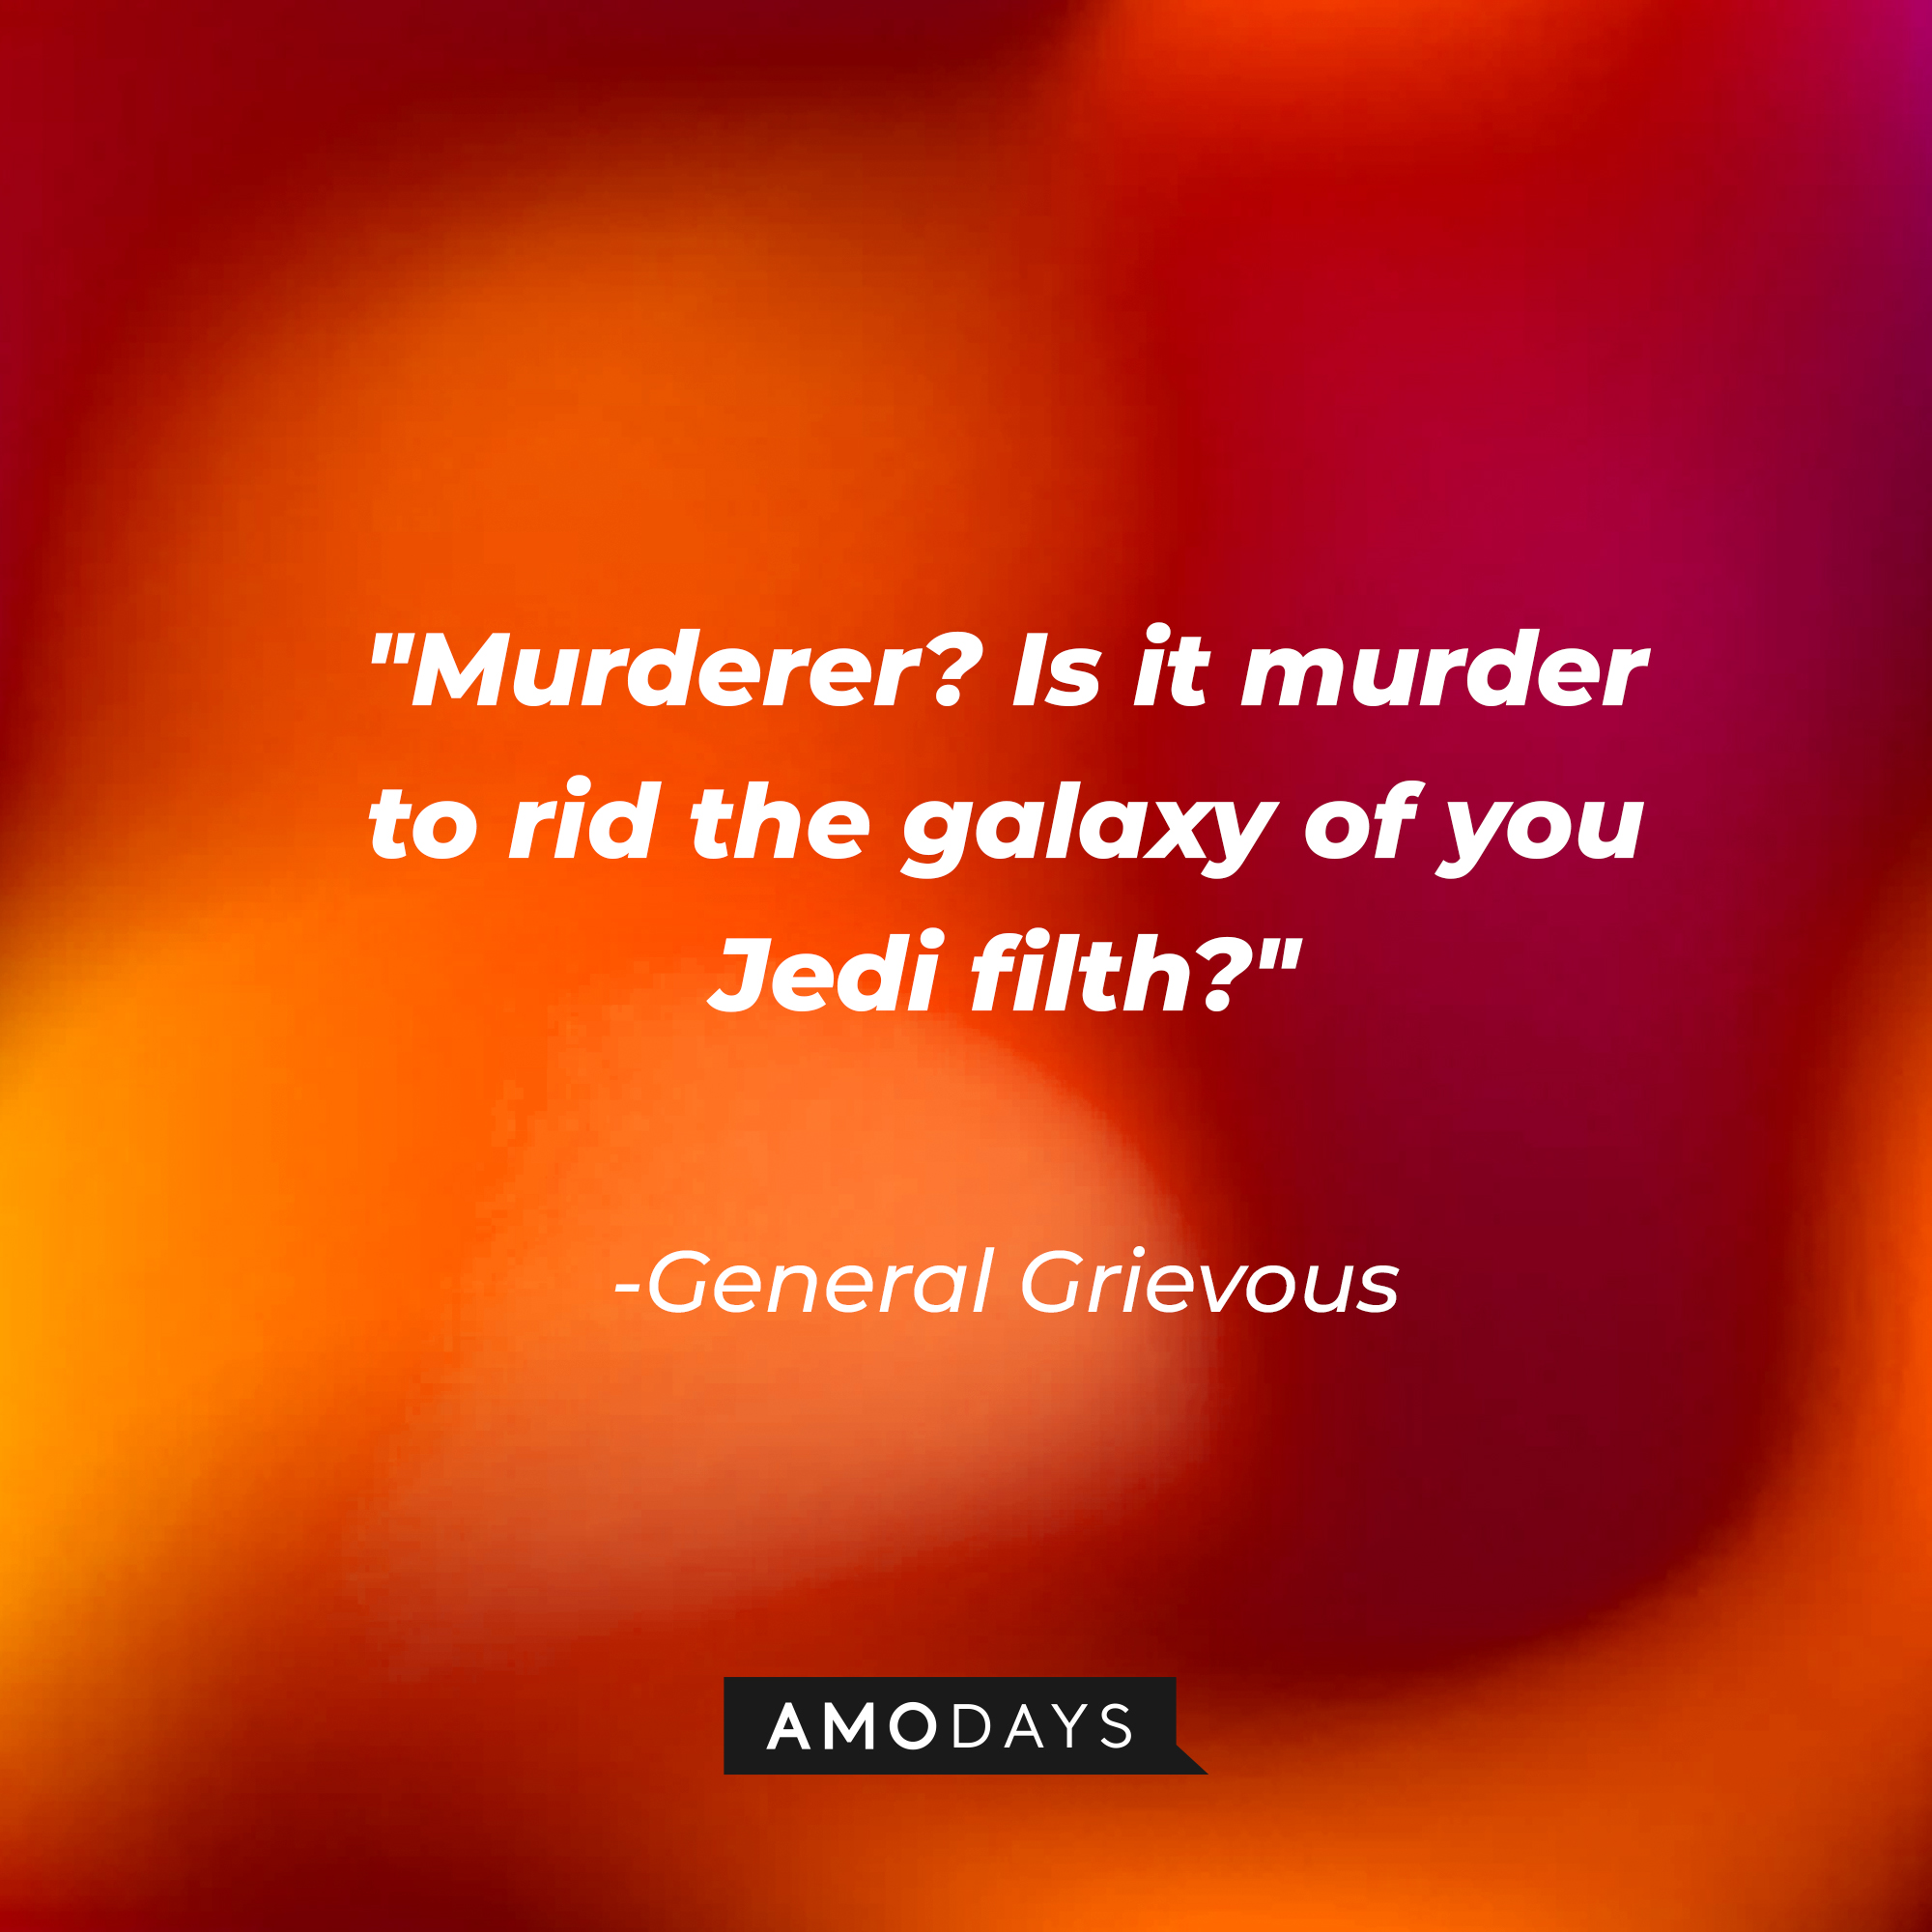 General Grievous' quote: "Murderer? Is it murder to rid the galaxy of you Jedi filth?" | Source: AmoDays